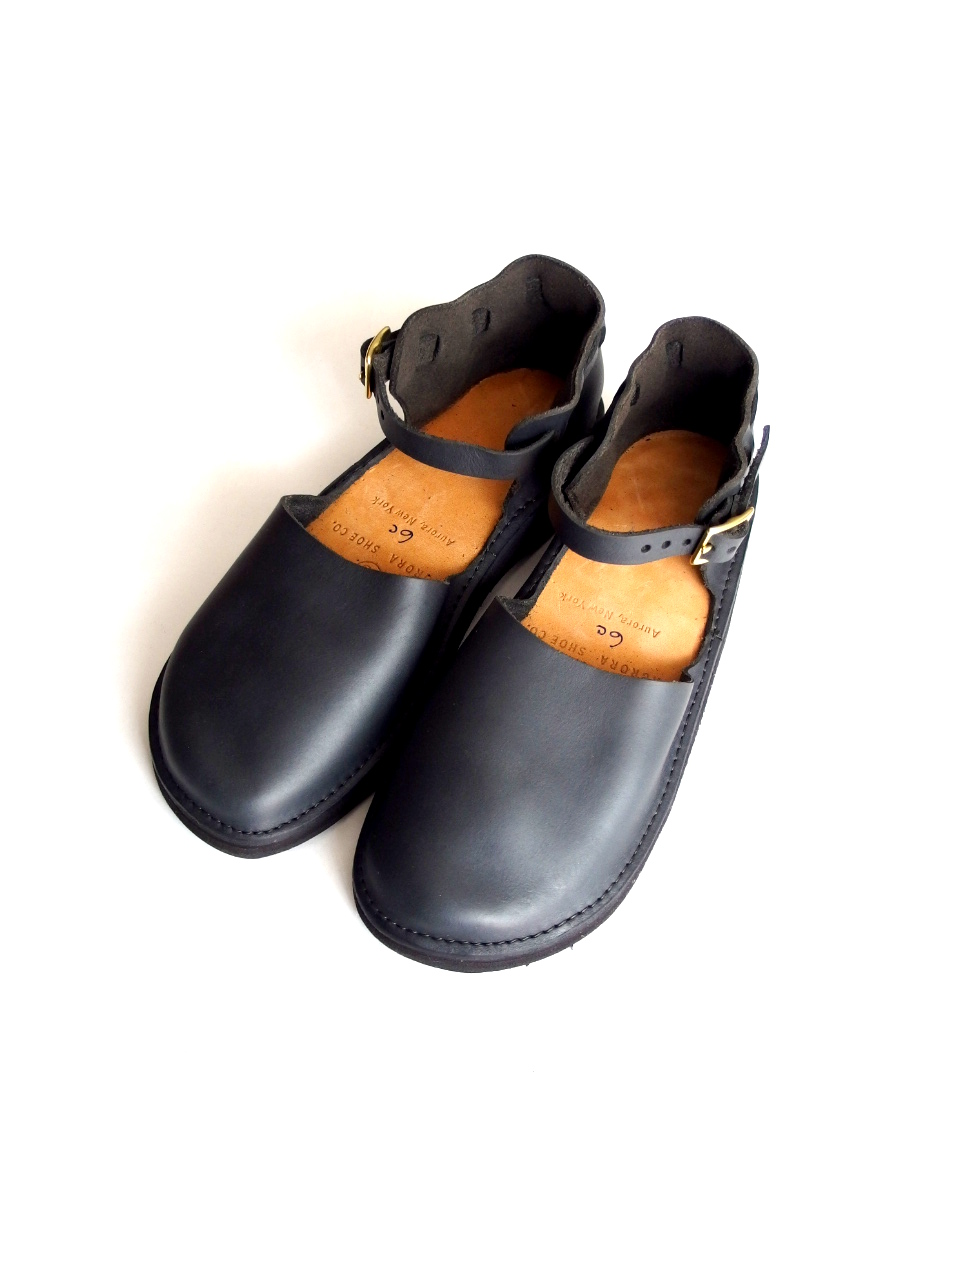 AURORA SHOES オーロラシューズ WEST INDIAN 6c-